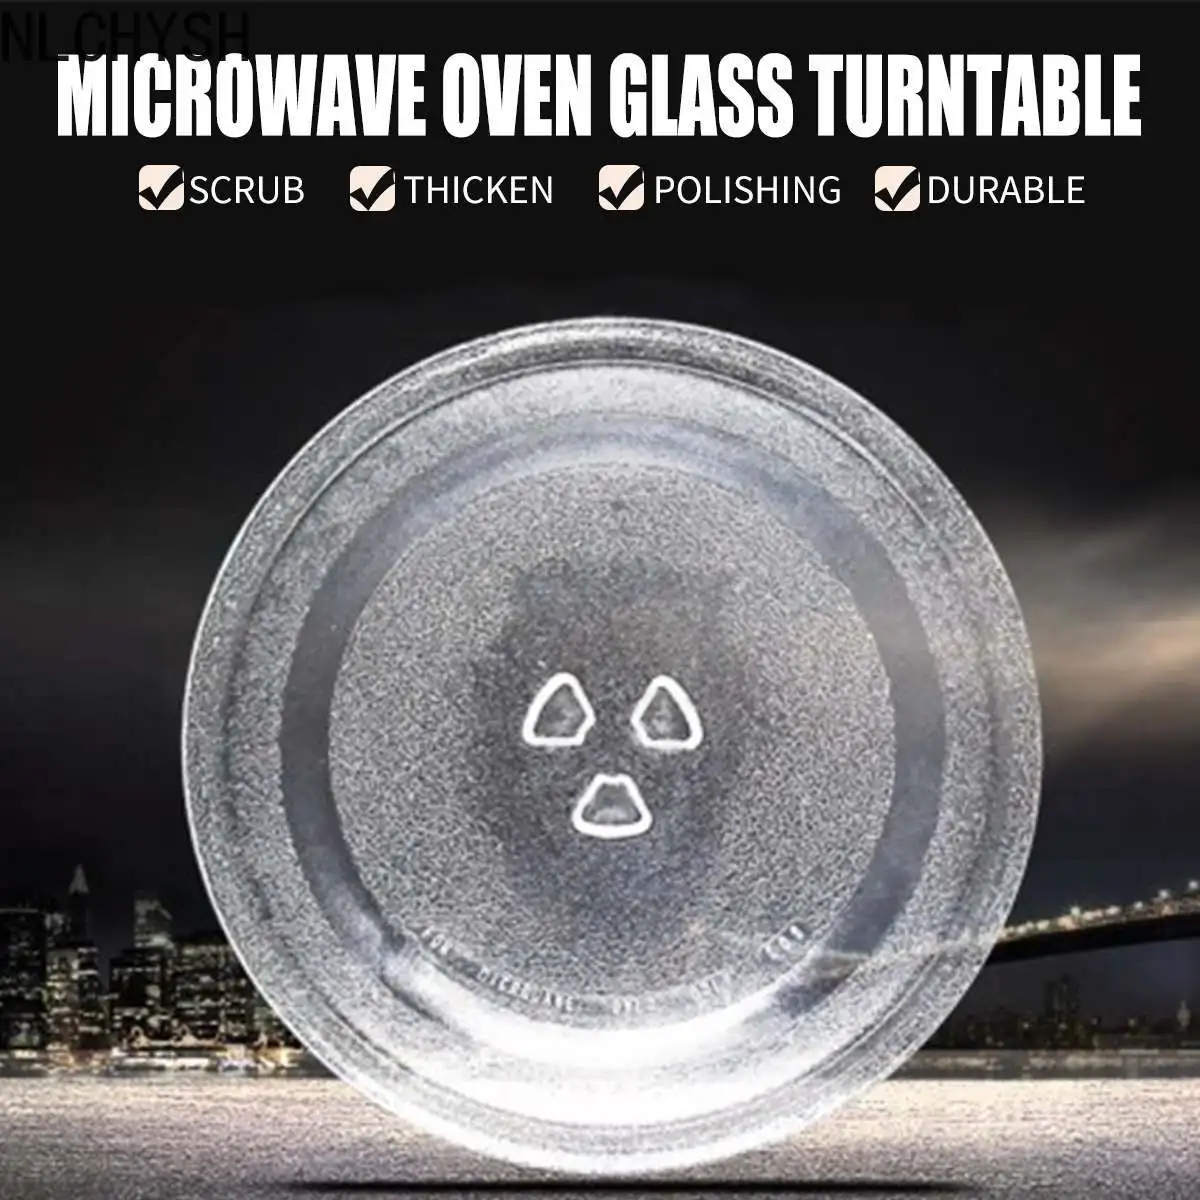 Univeral Microwave Oven Glass Turntable Plate Platter 245 mm Suits for Midea and Many Brand Thicken